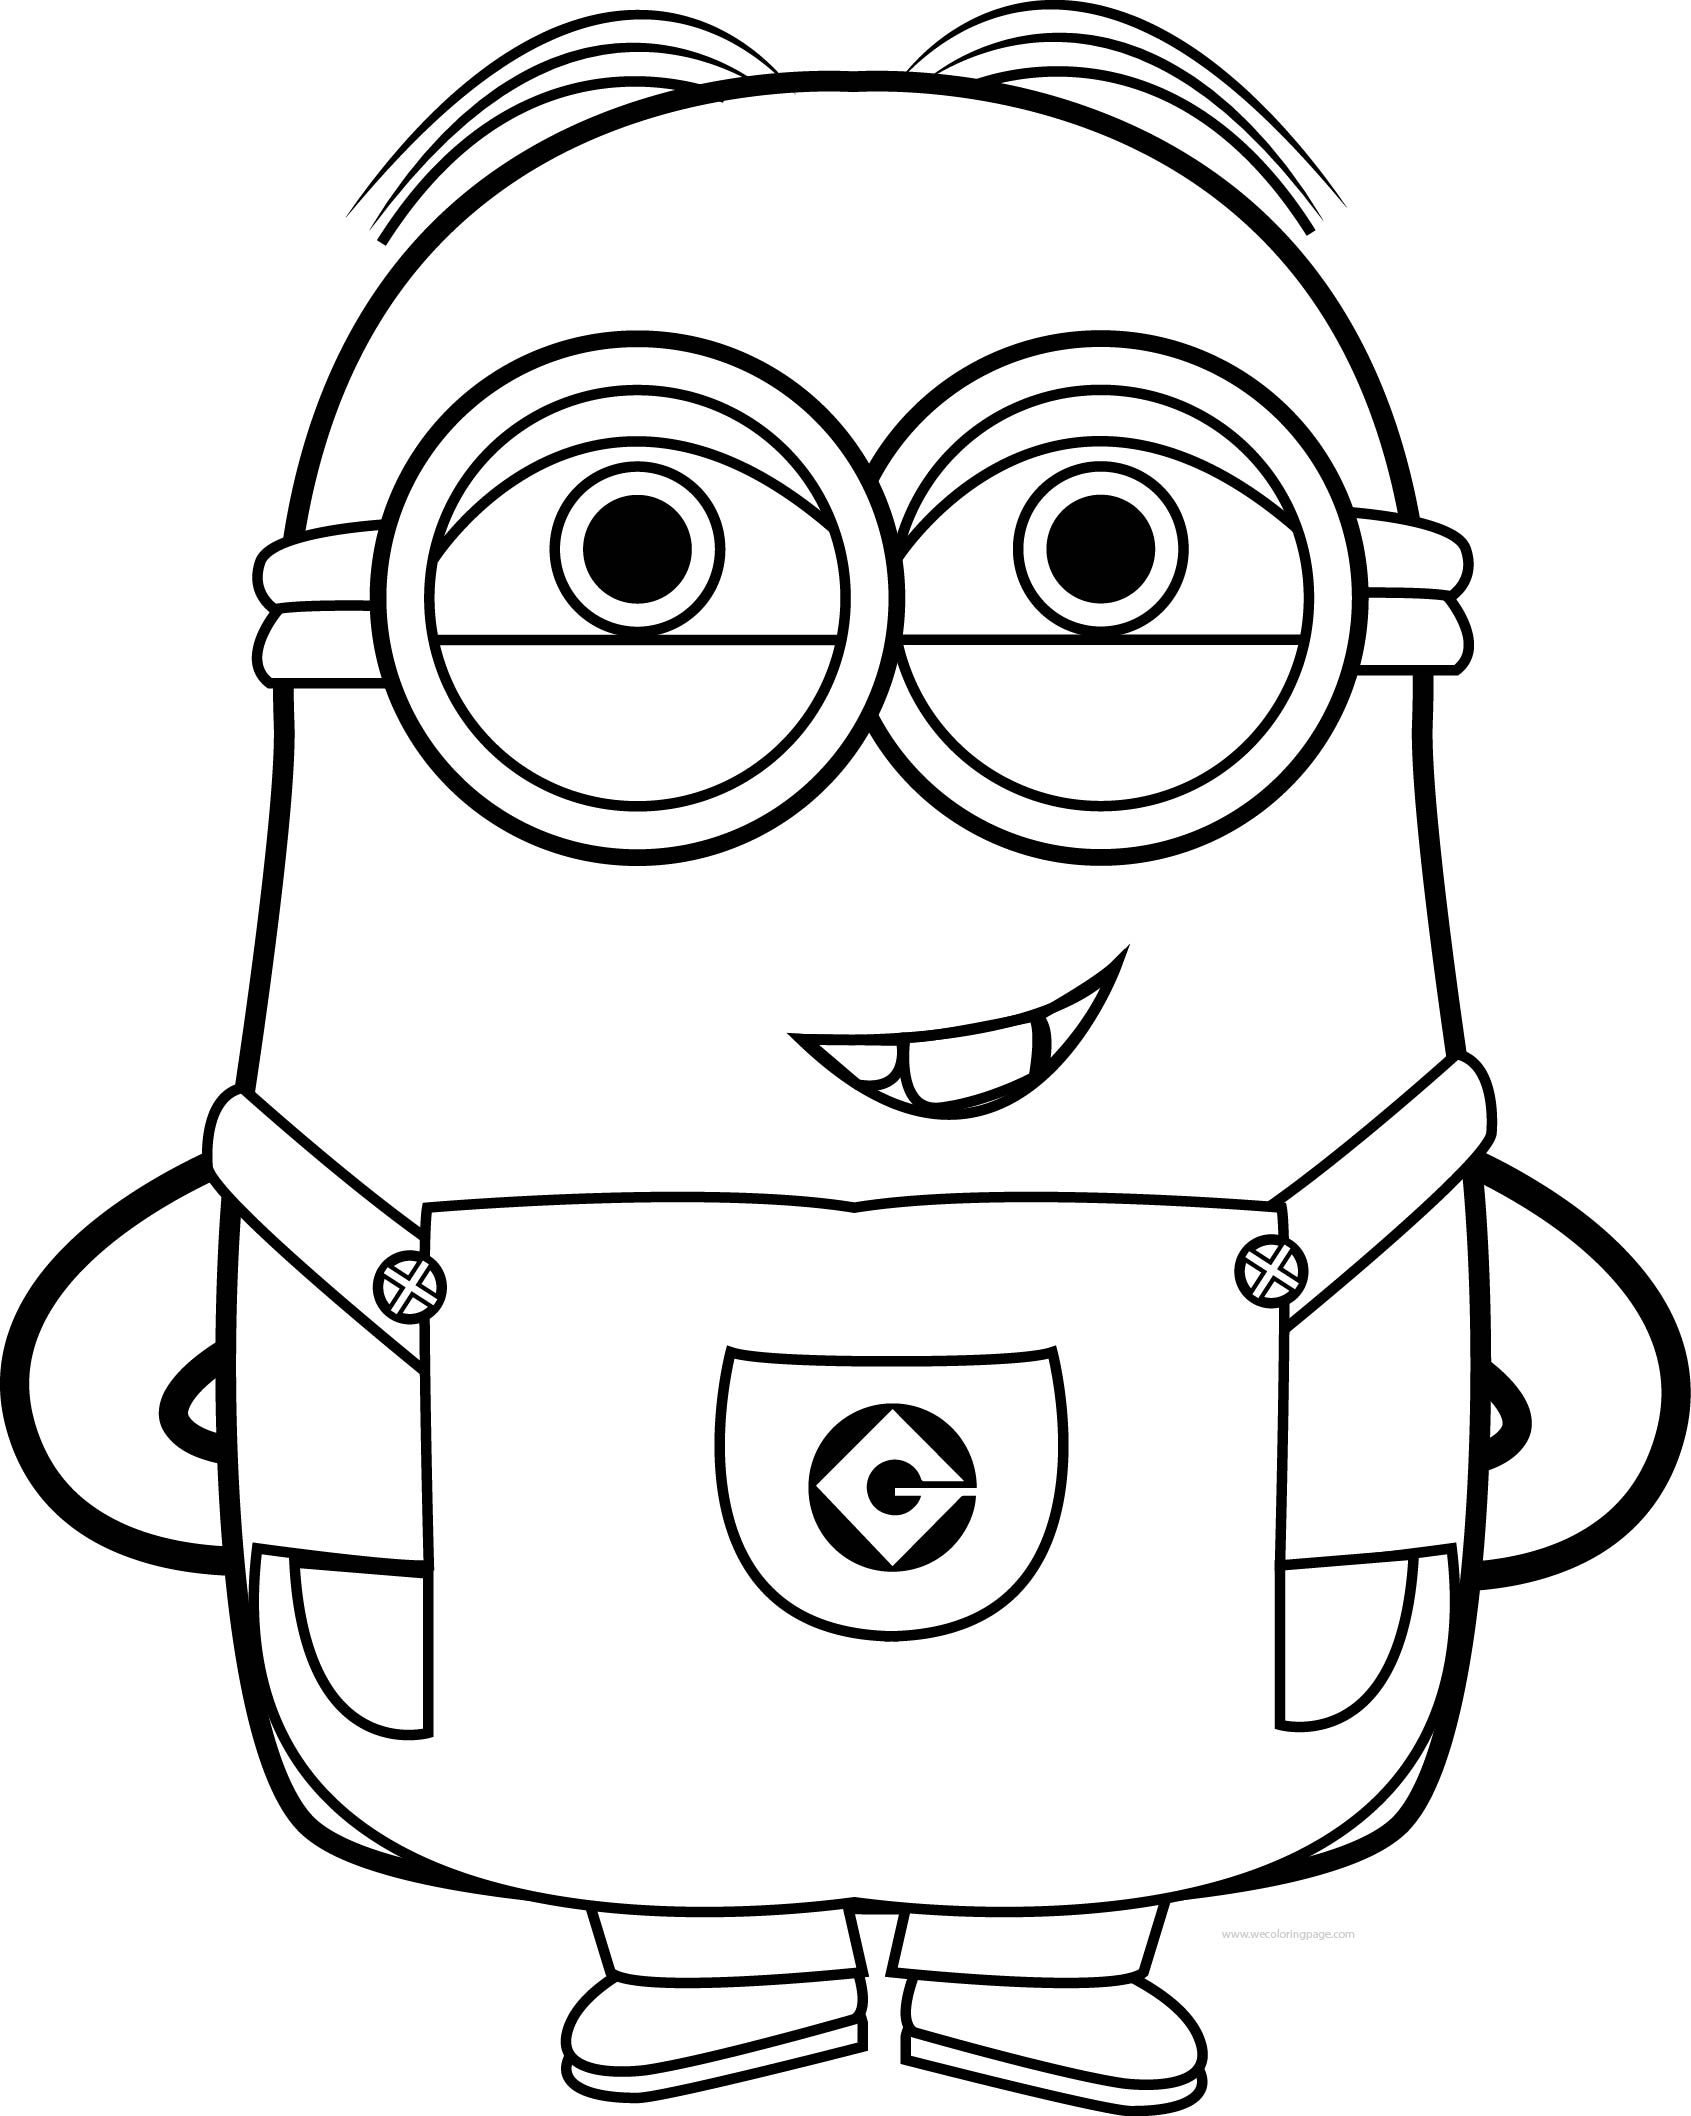 Cute Minion Coloring Pages at GetColorings.com | Free printable ...